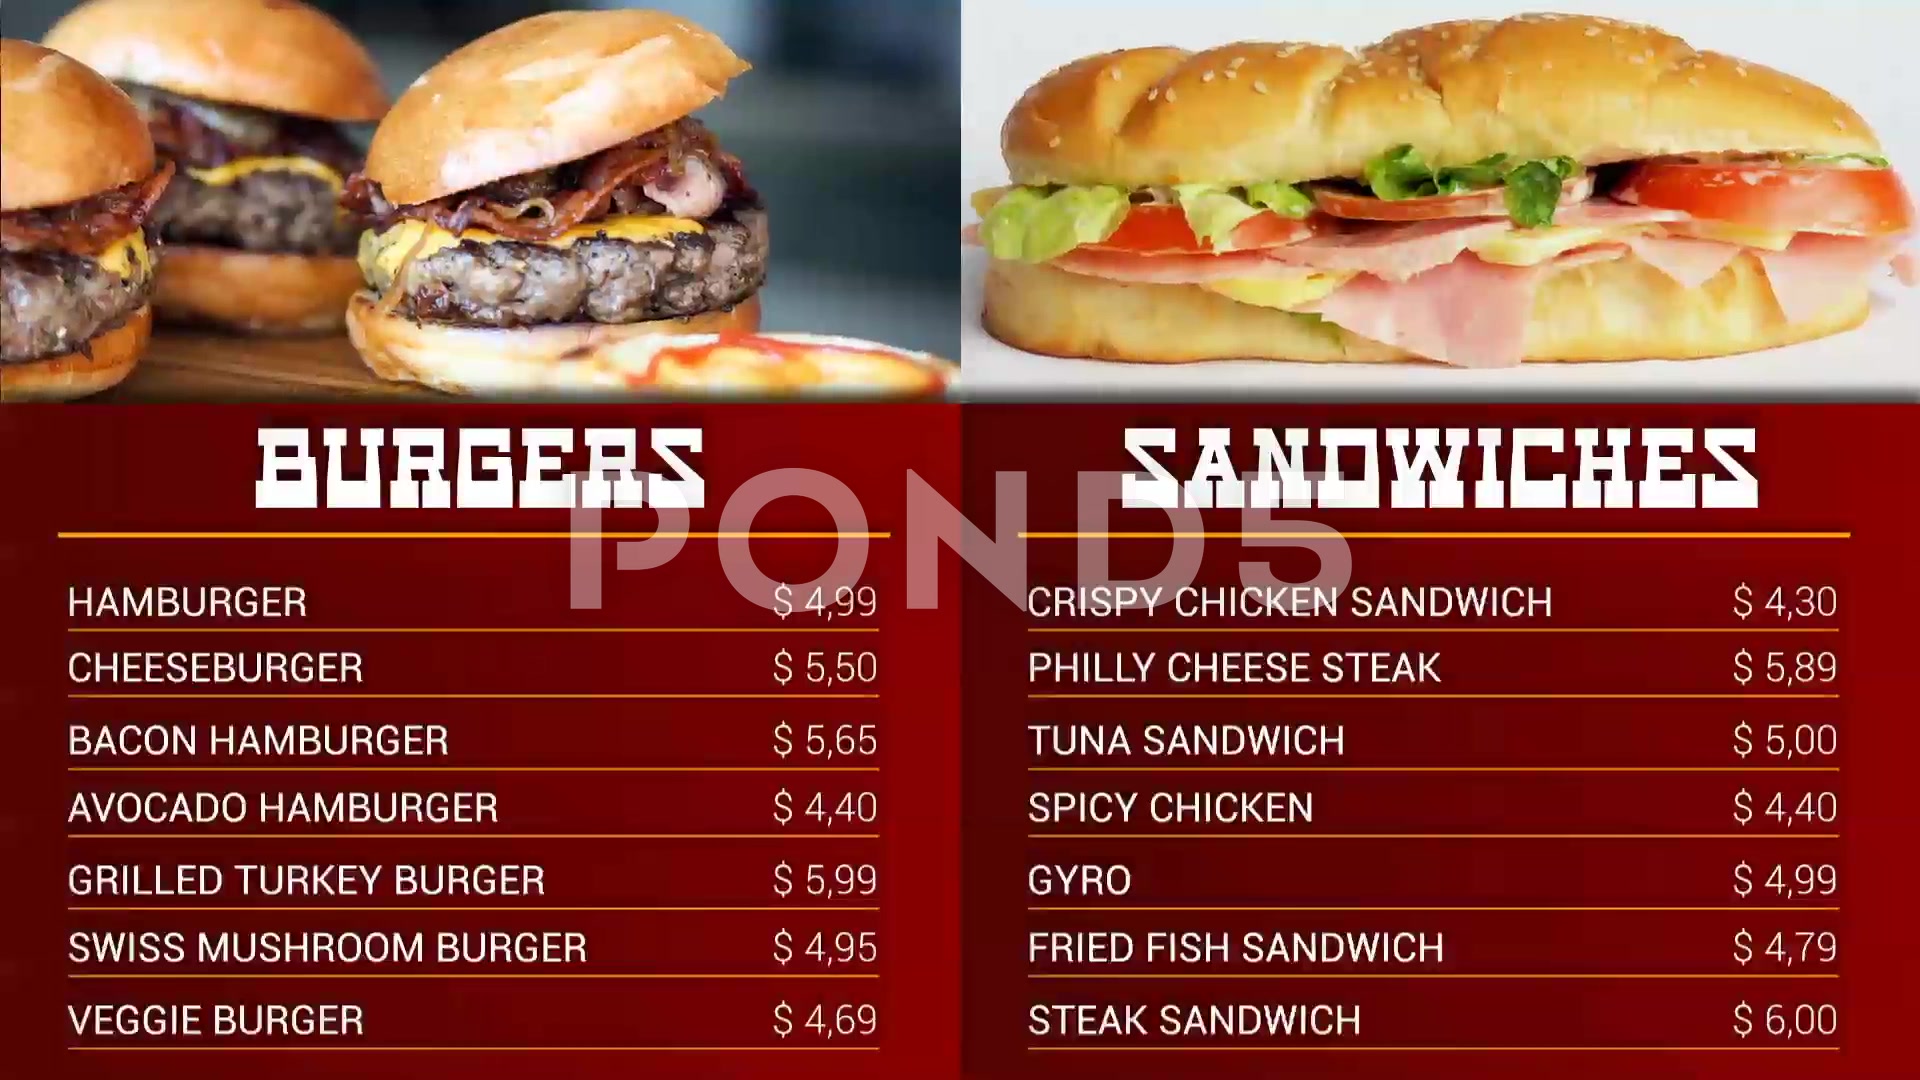 After Effects Template: Fast Food Menu Board #61153447